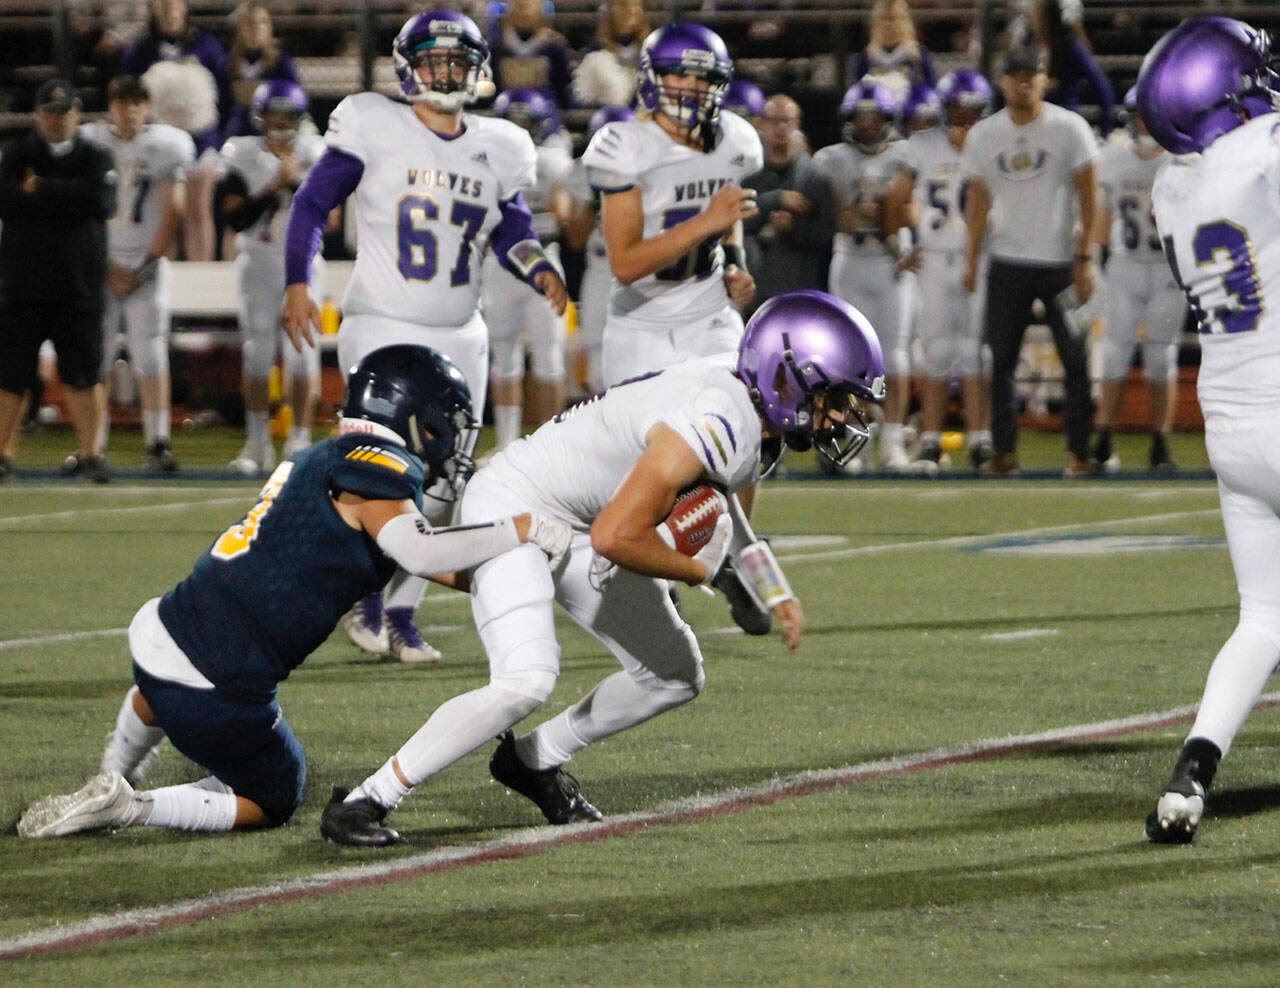 Sequim’s Aiden Gockerell makes a reception and tries to escape the grasp of Bainbridge defensive back Jeff Utter in the Wolves’ 48-10 loss at Bainbridge on Sept. 24. Photos by Mark Krulish/Kitsap News Group